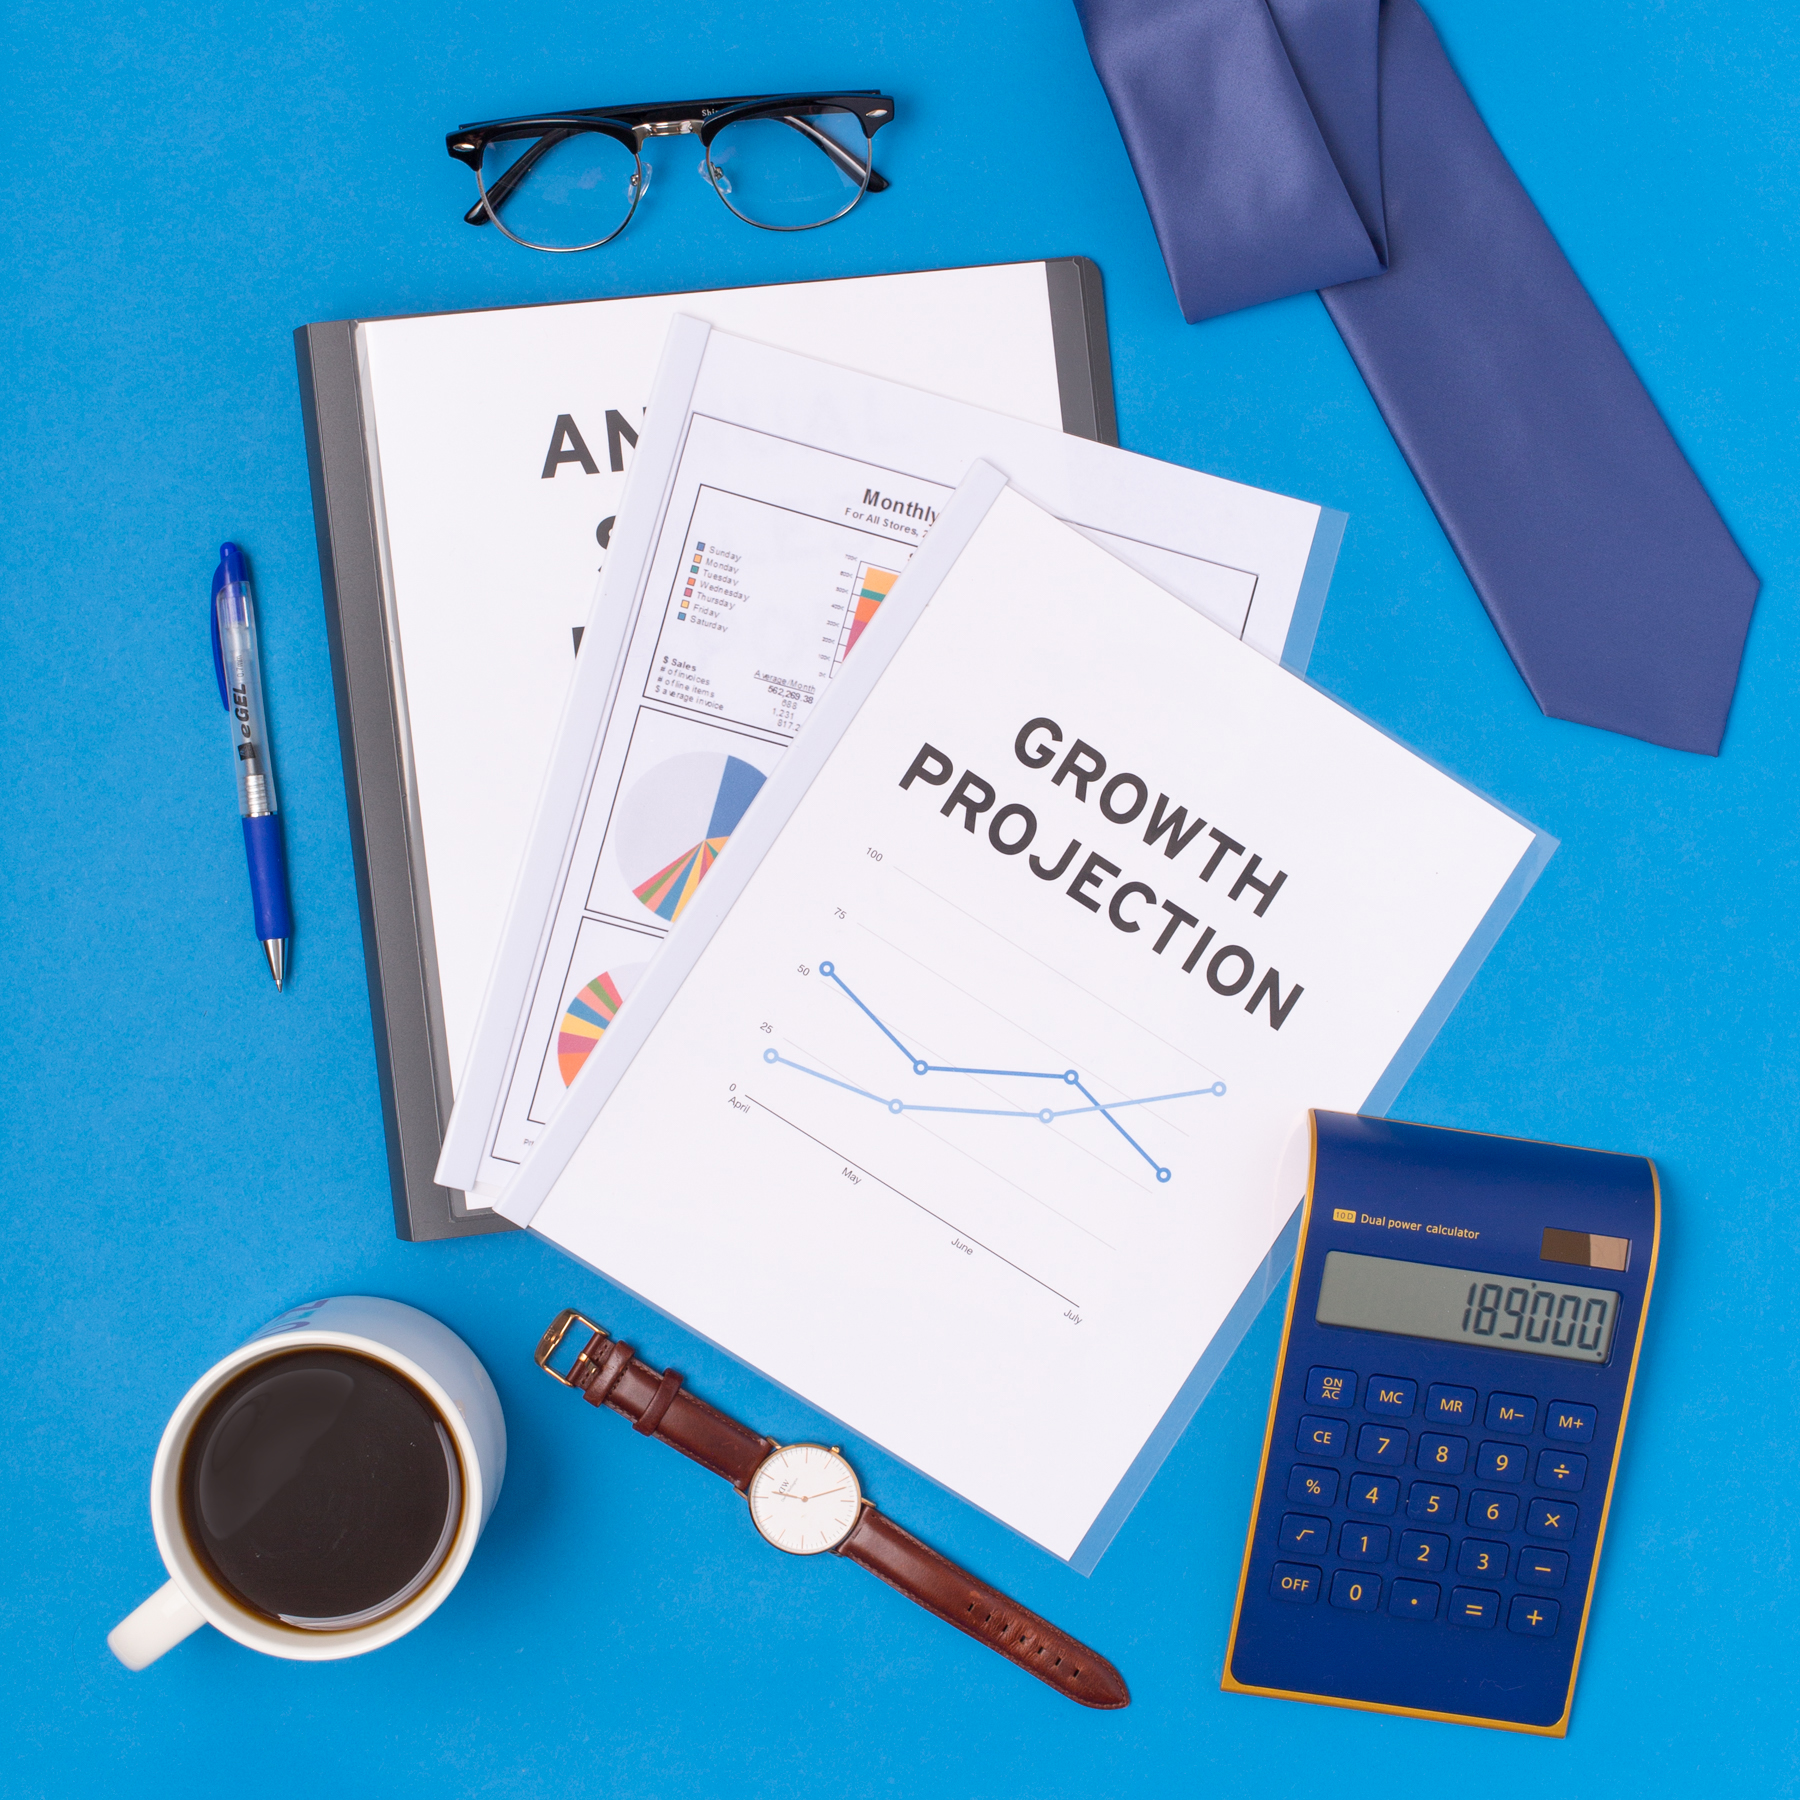 photo of desk supplies and business documents, including a booklet titled "growth projection"